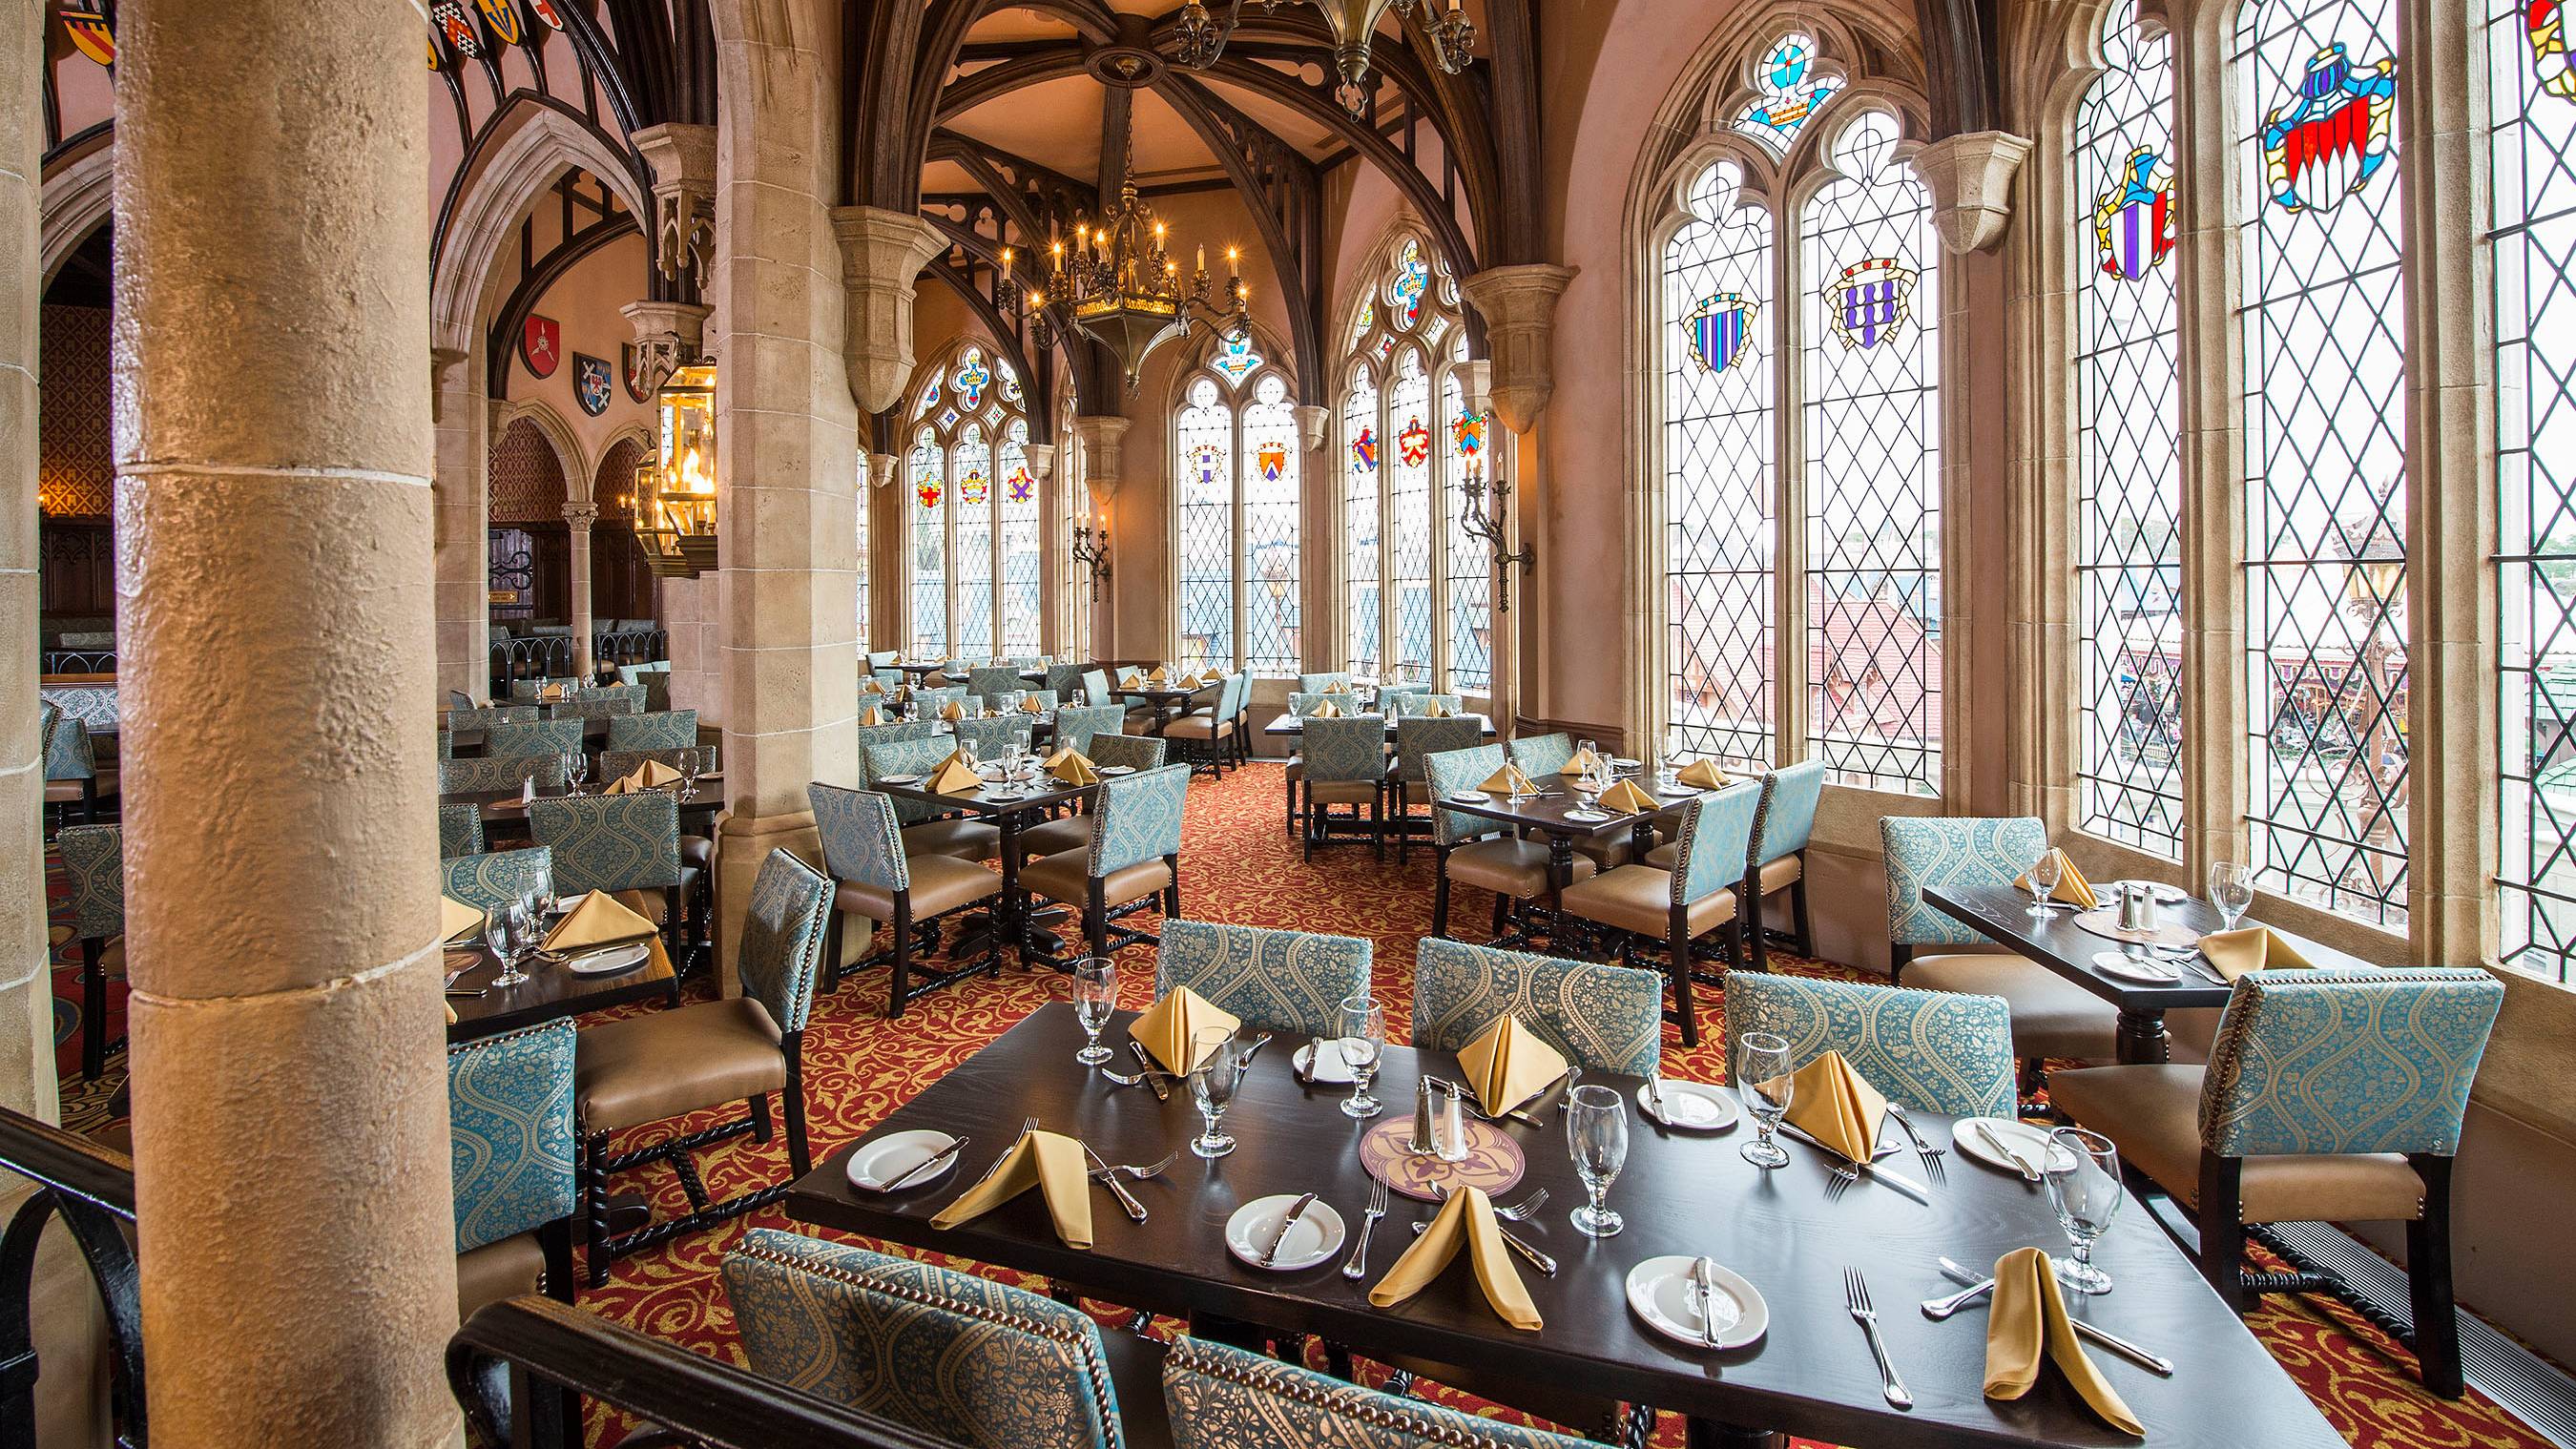 New Signature Celebration Package coming to Cinderella's Royal Table